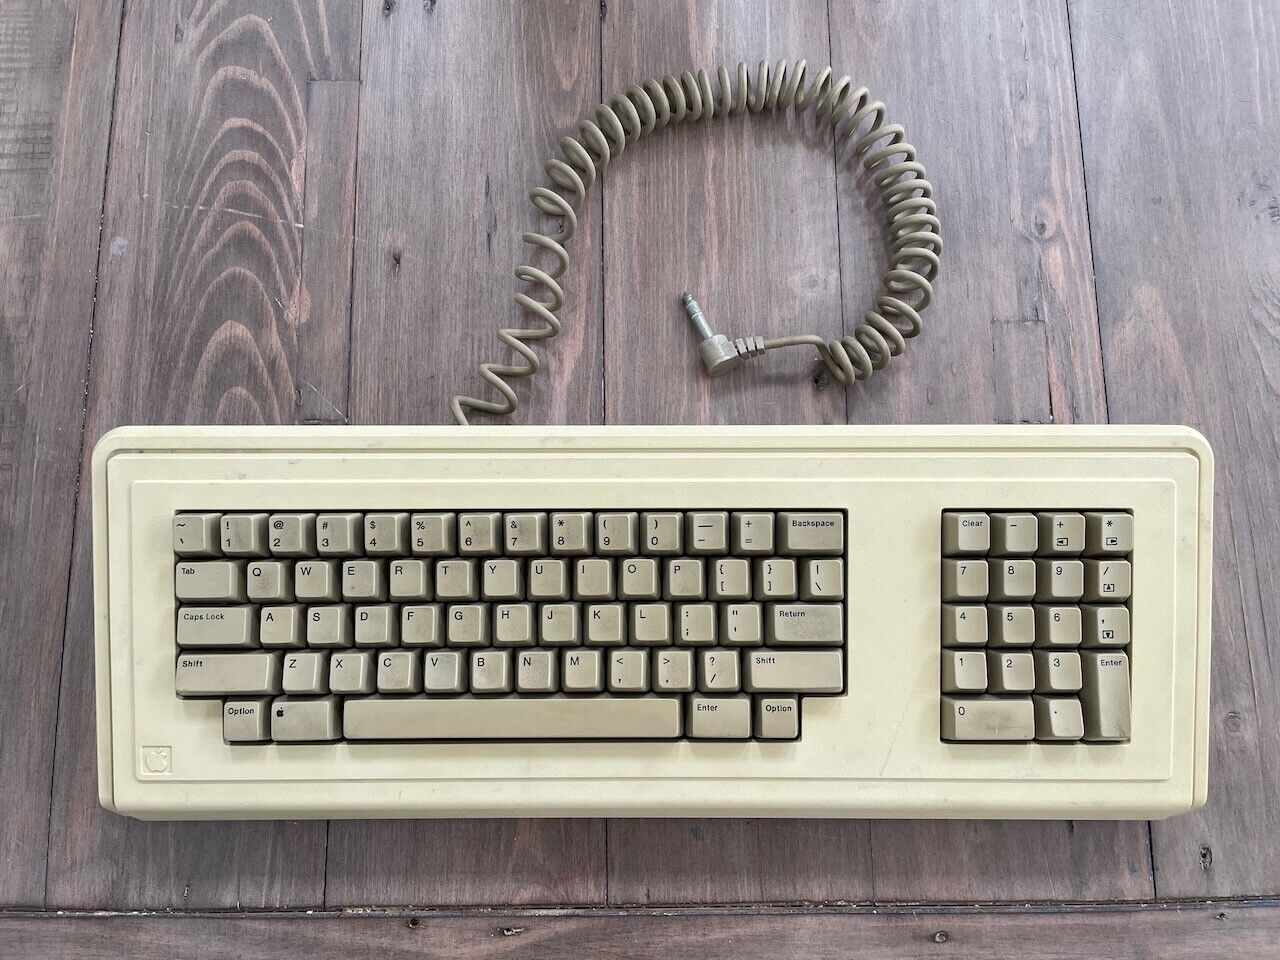 Vintage Apple Lisa Keyboard A6MB101 Confirmed Working, with new foam & foil pads